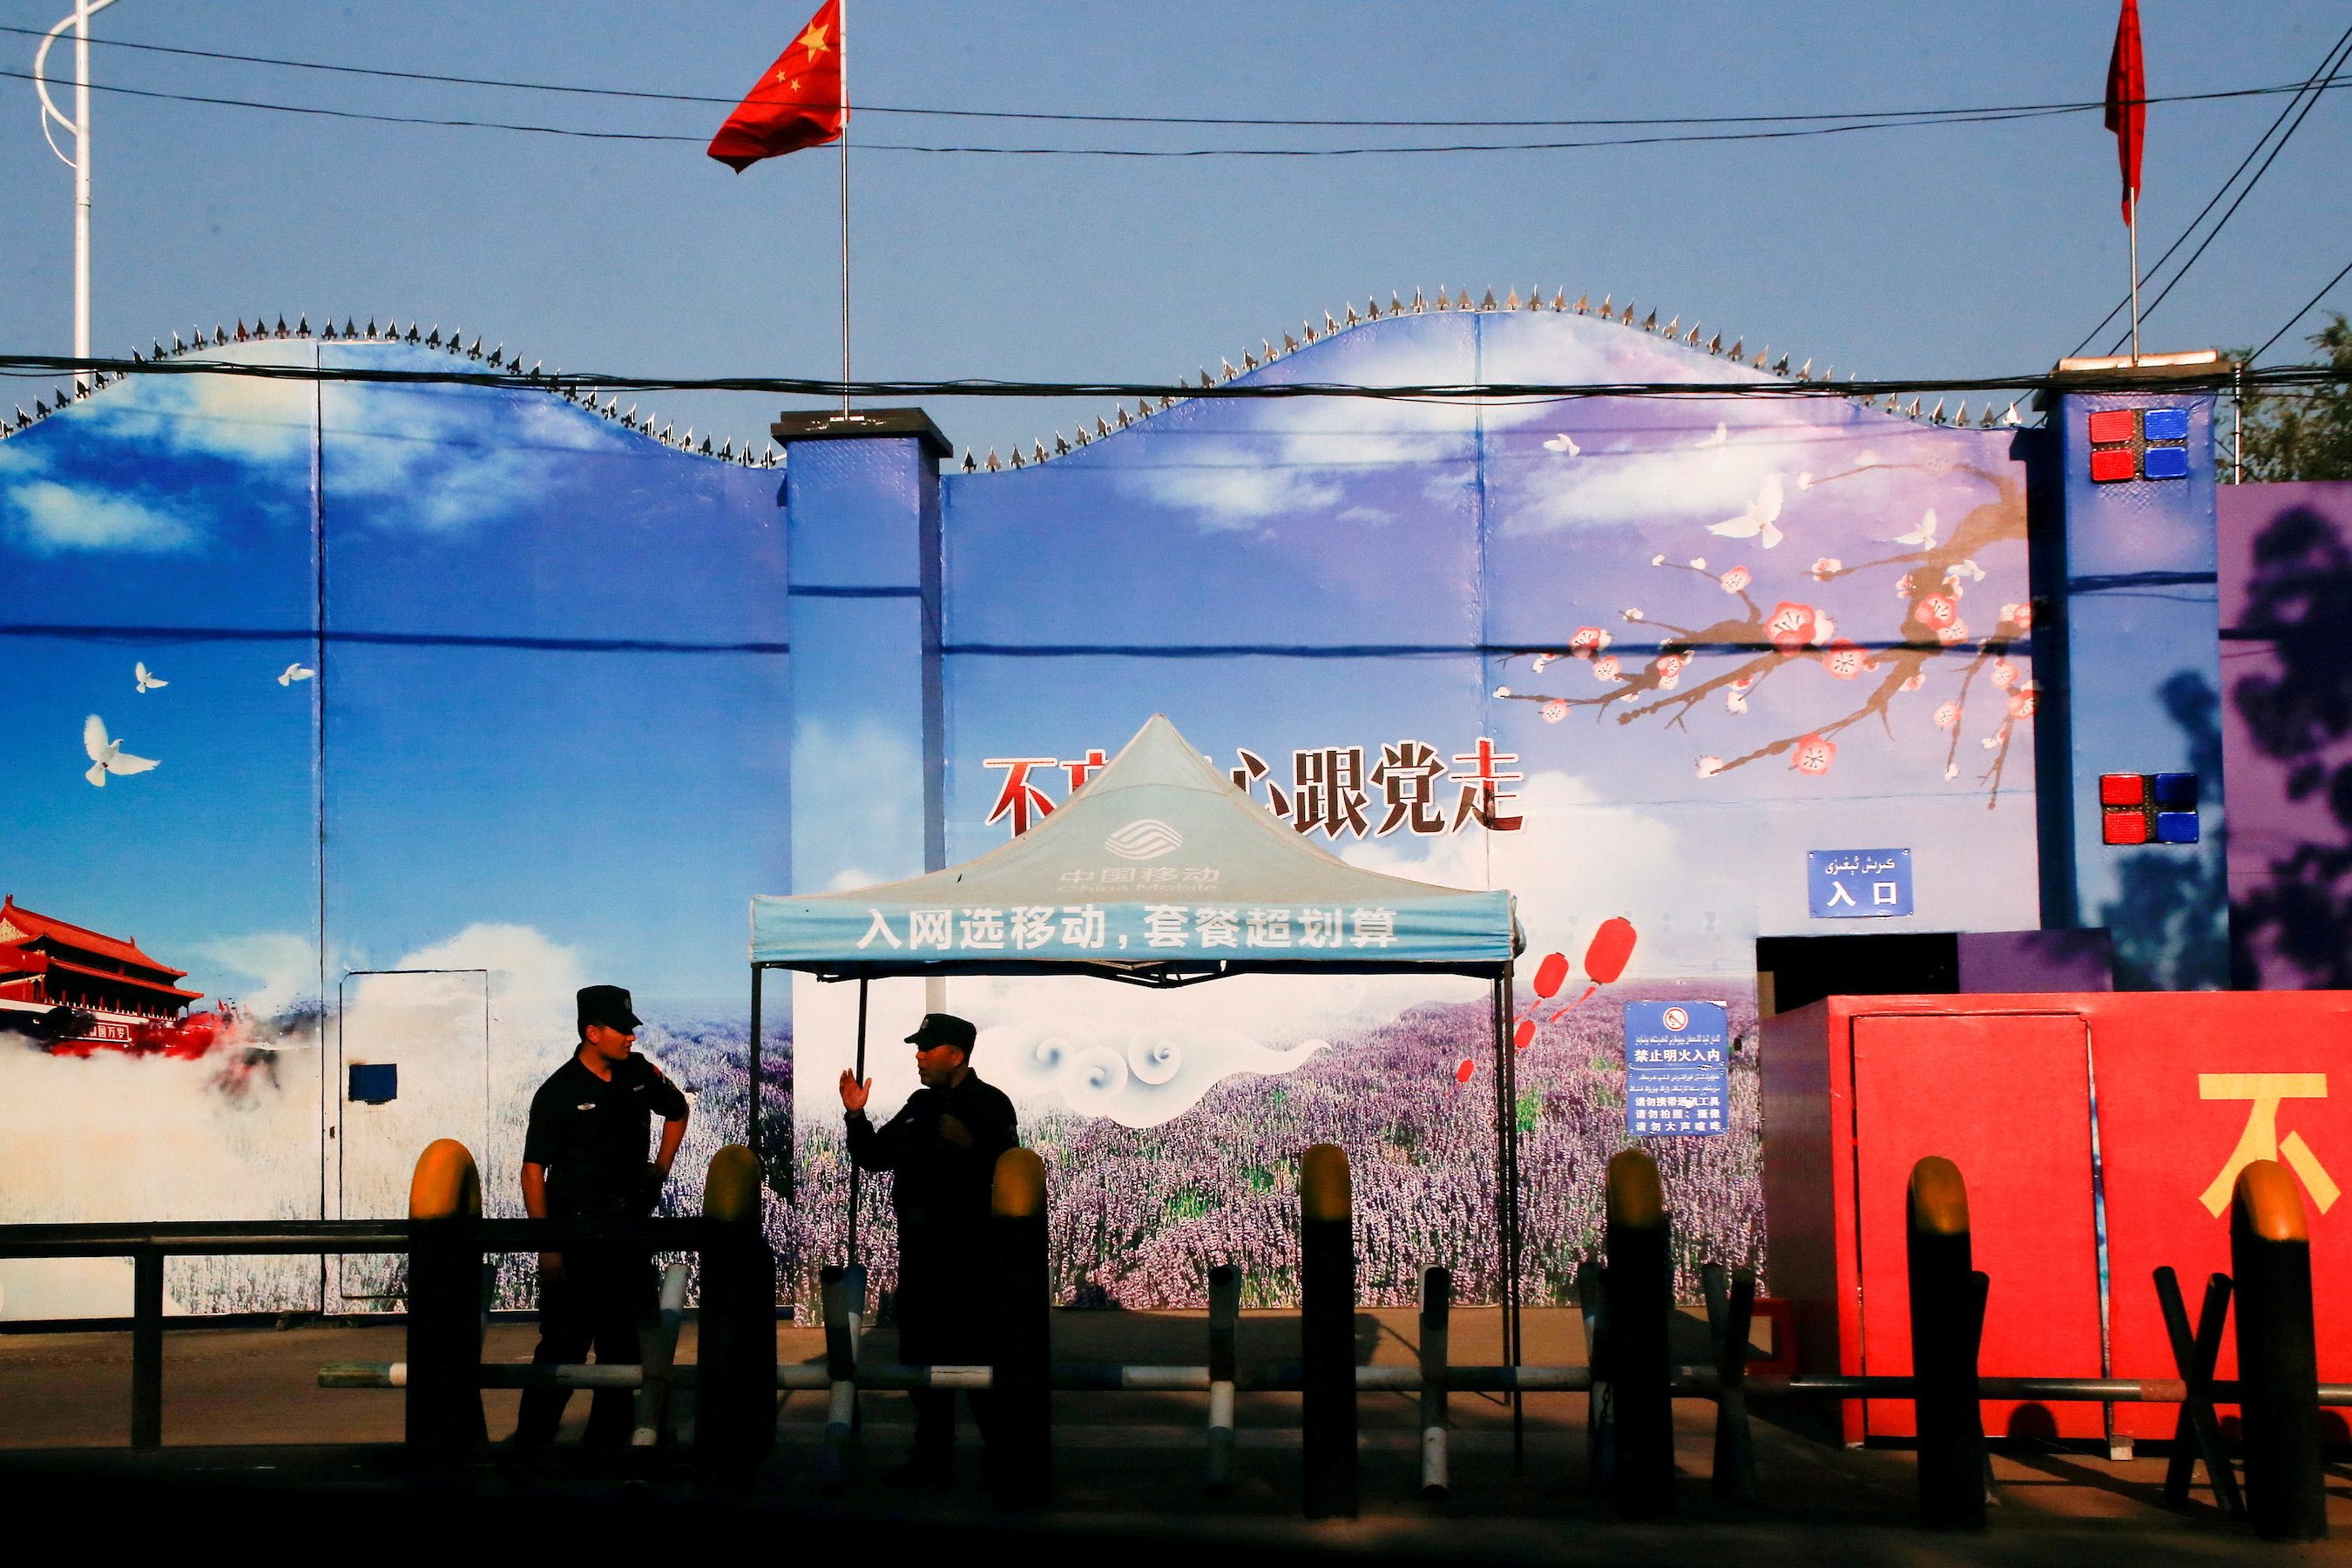 US ramps up warnings of business risks in China’s Xinjiang region